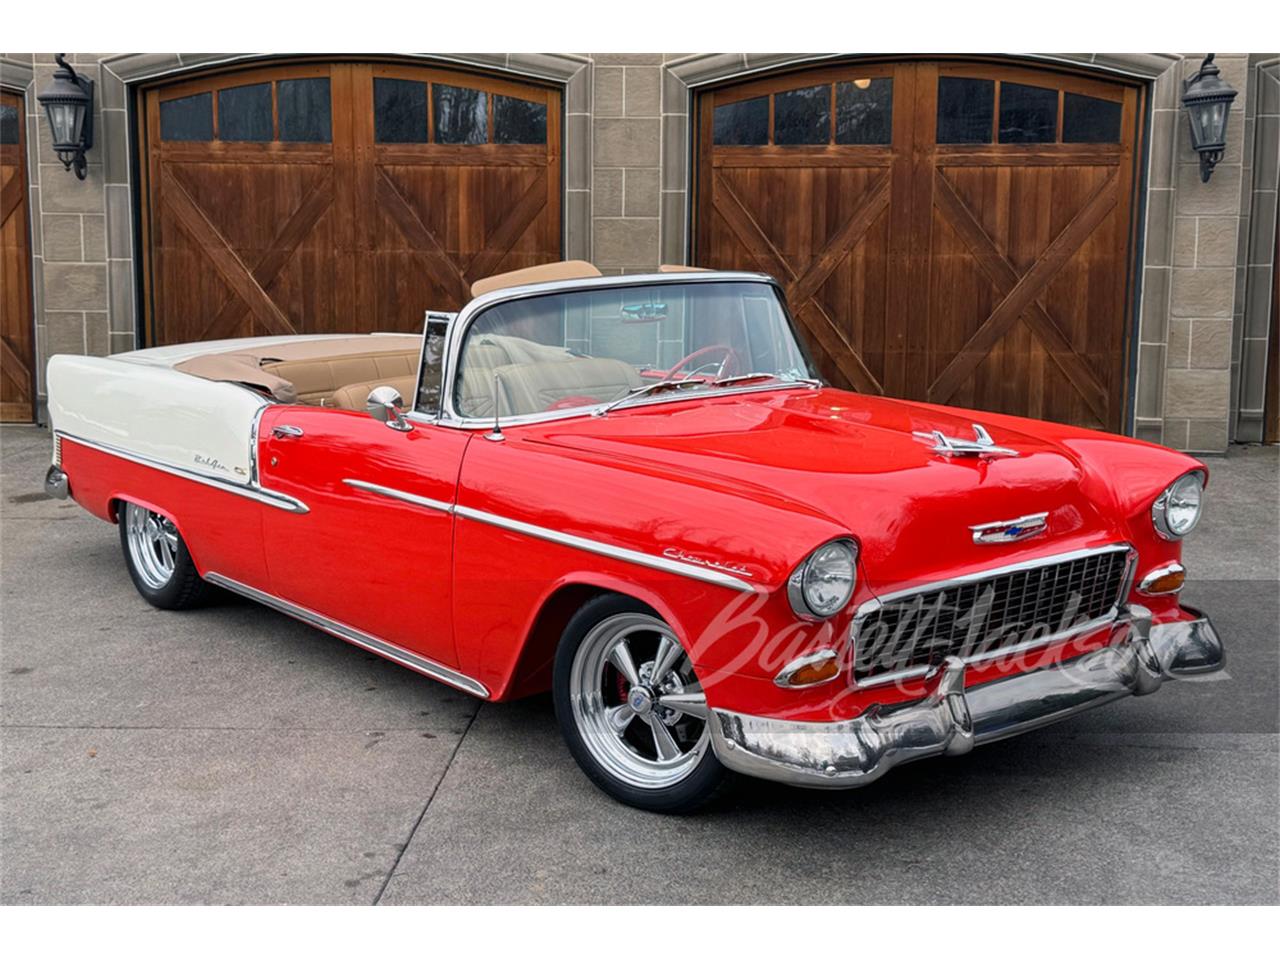 For Sale at Auction: 1955 Chevrolet Bel Air in Scottsdale, Arizona for sale in Scottsdale, AZ